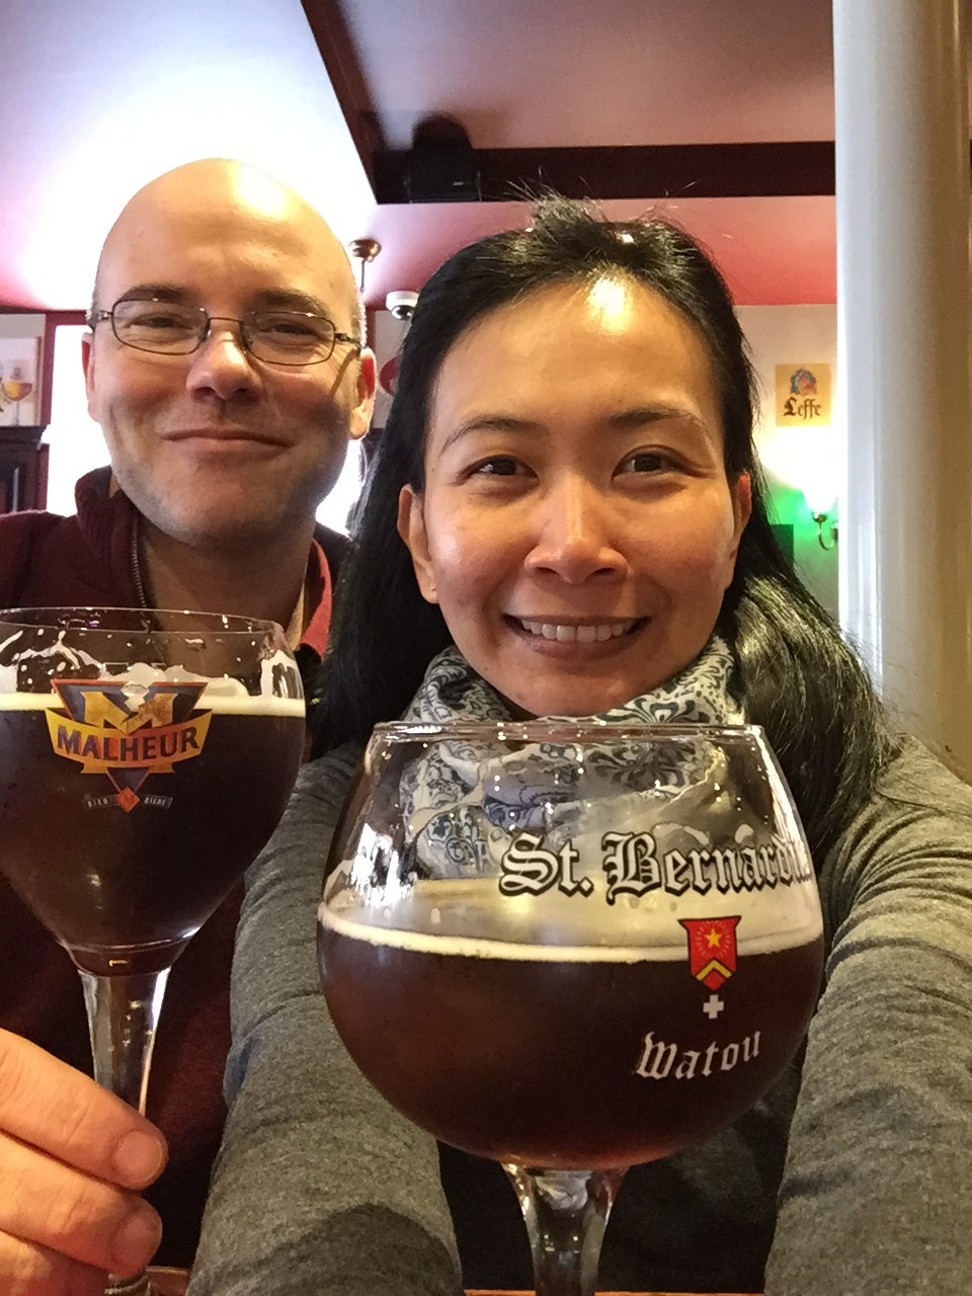 Reynolds, with his wife, Jill, enjoying Belgian beers in Bruges, in 2016. Picture: Brad Reynolds